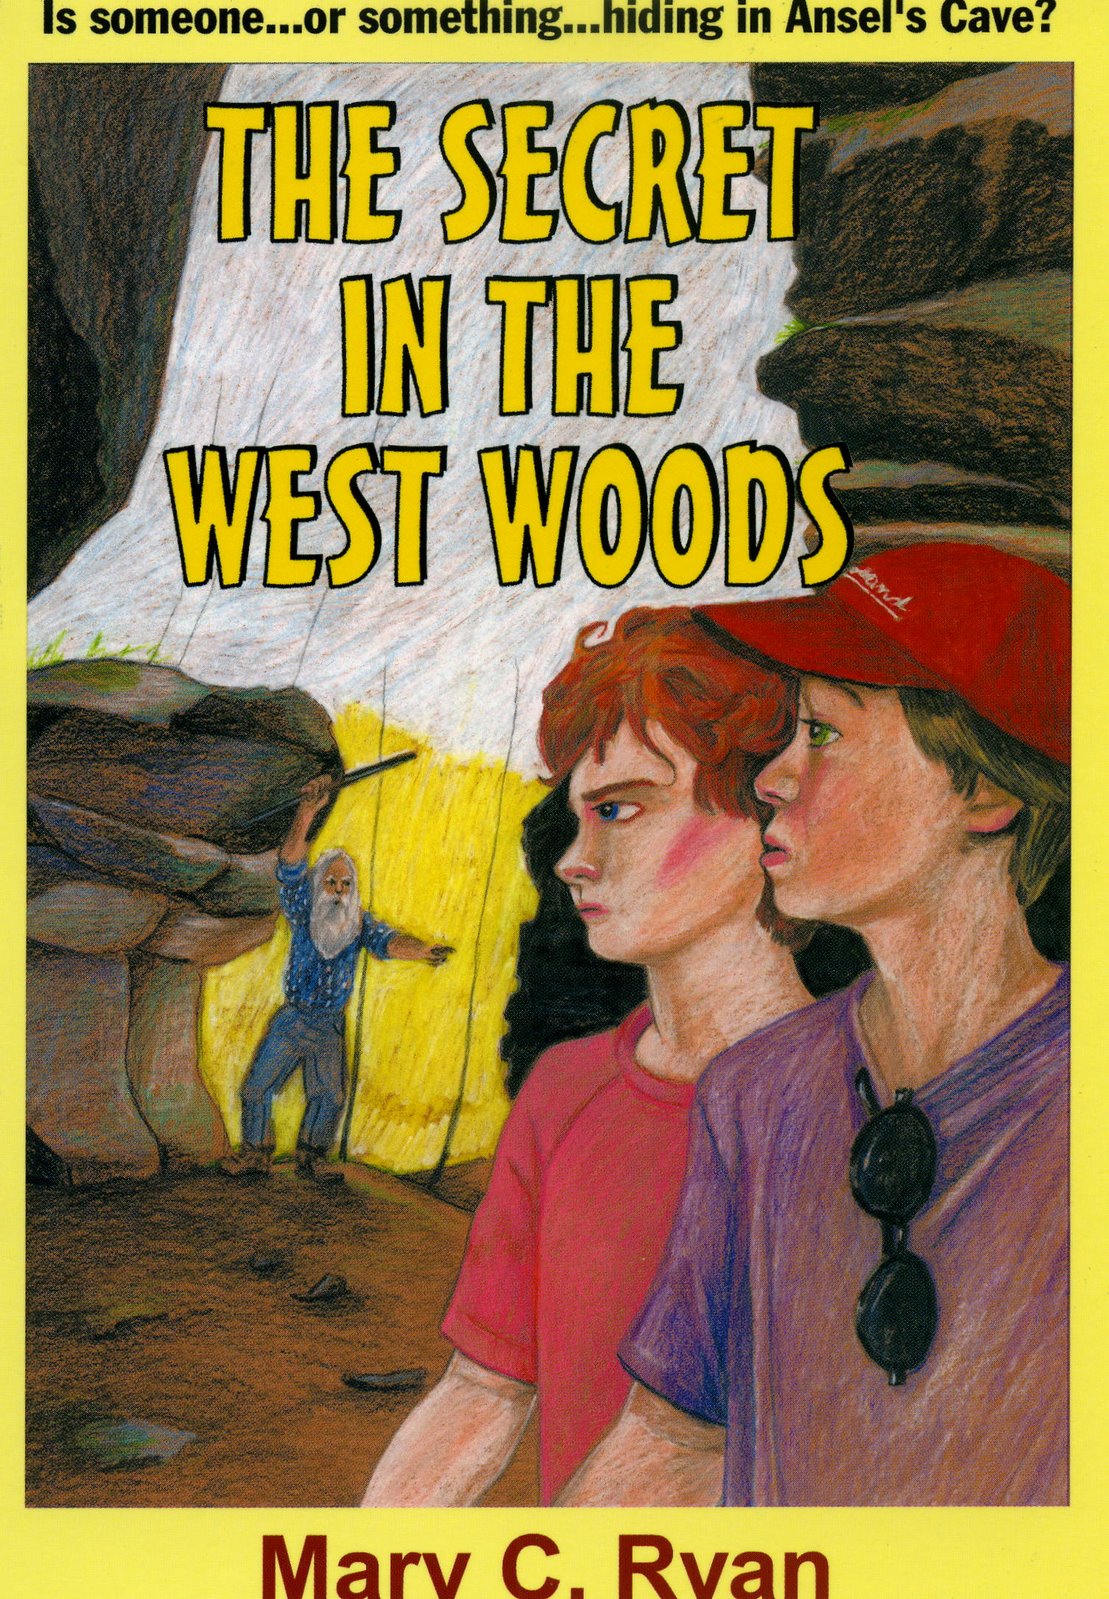 The Secret in The West Woods (Ages 8 - 12)